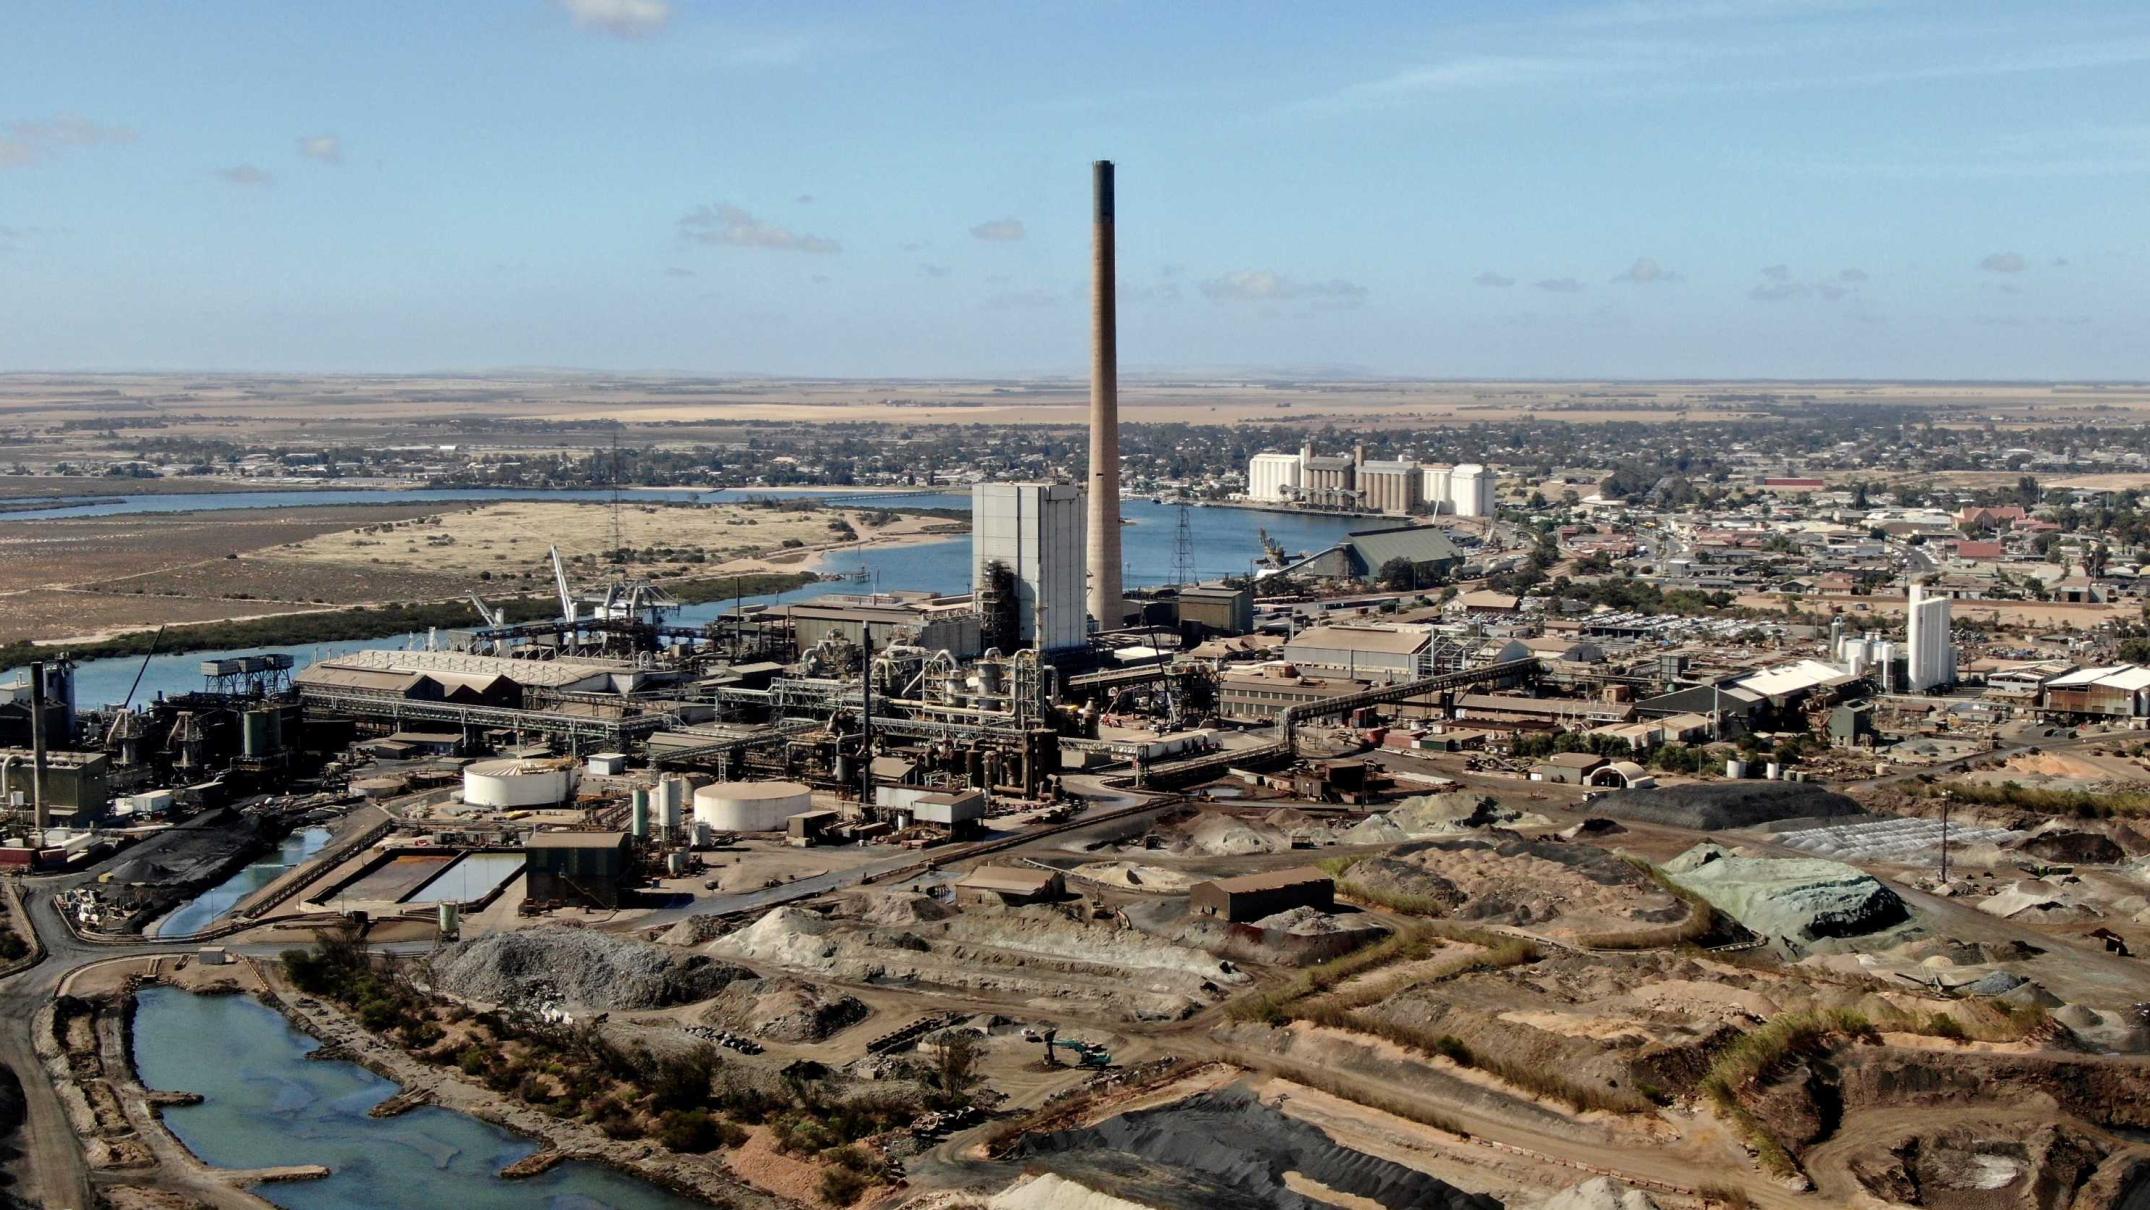 Lead levels in twoyearolds hit 10year high in SA smelter city SA